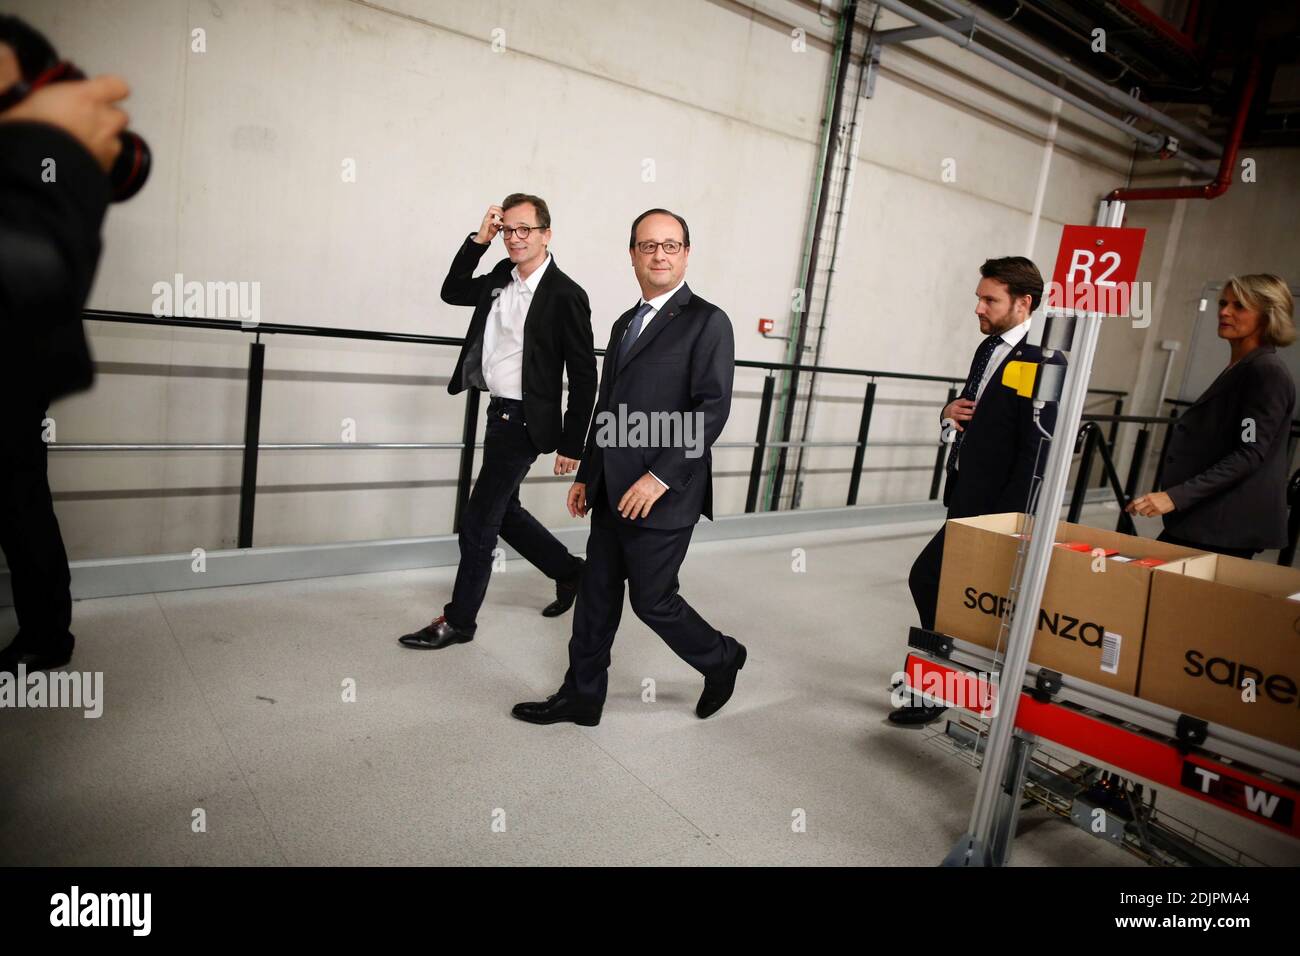 French President Francois Hollande along with Sarenza director of the Board  Stephane Treppoz tours the logistics warehouse of Sarenza, a French  e-Commerce company specializing in the online sale of shoes and accessories,